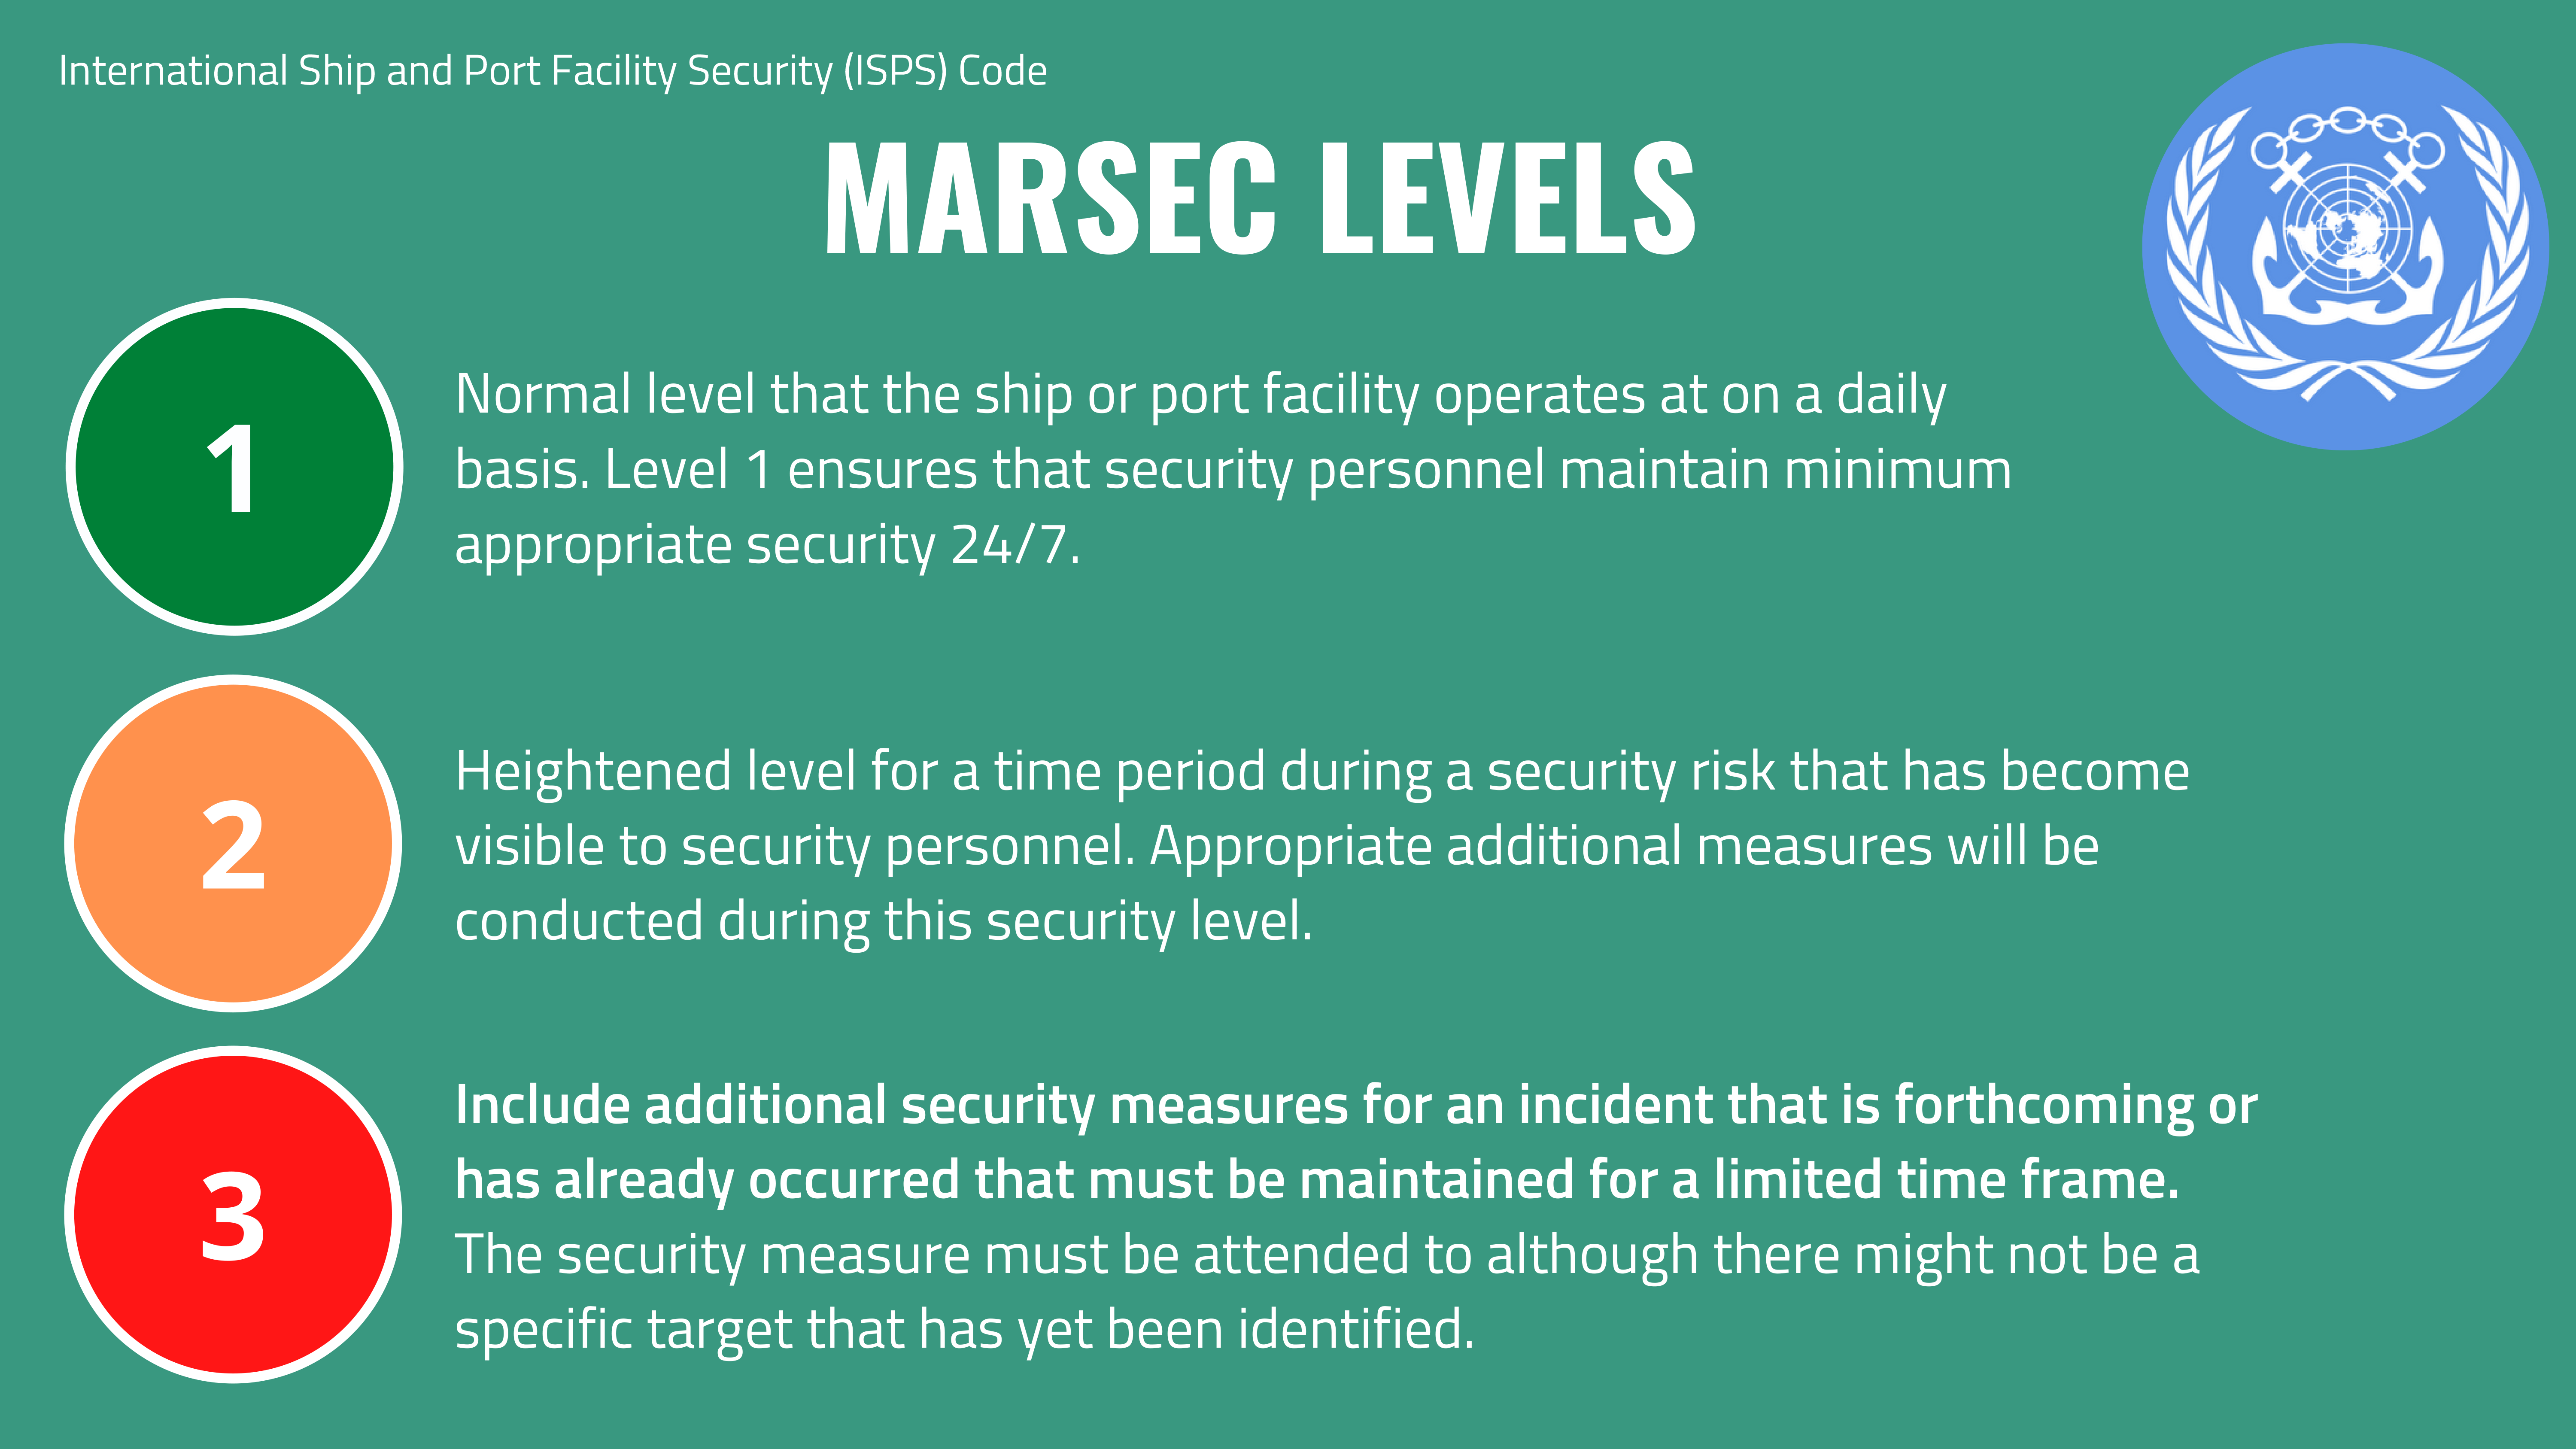 Marsec levels and guidance